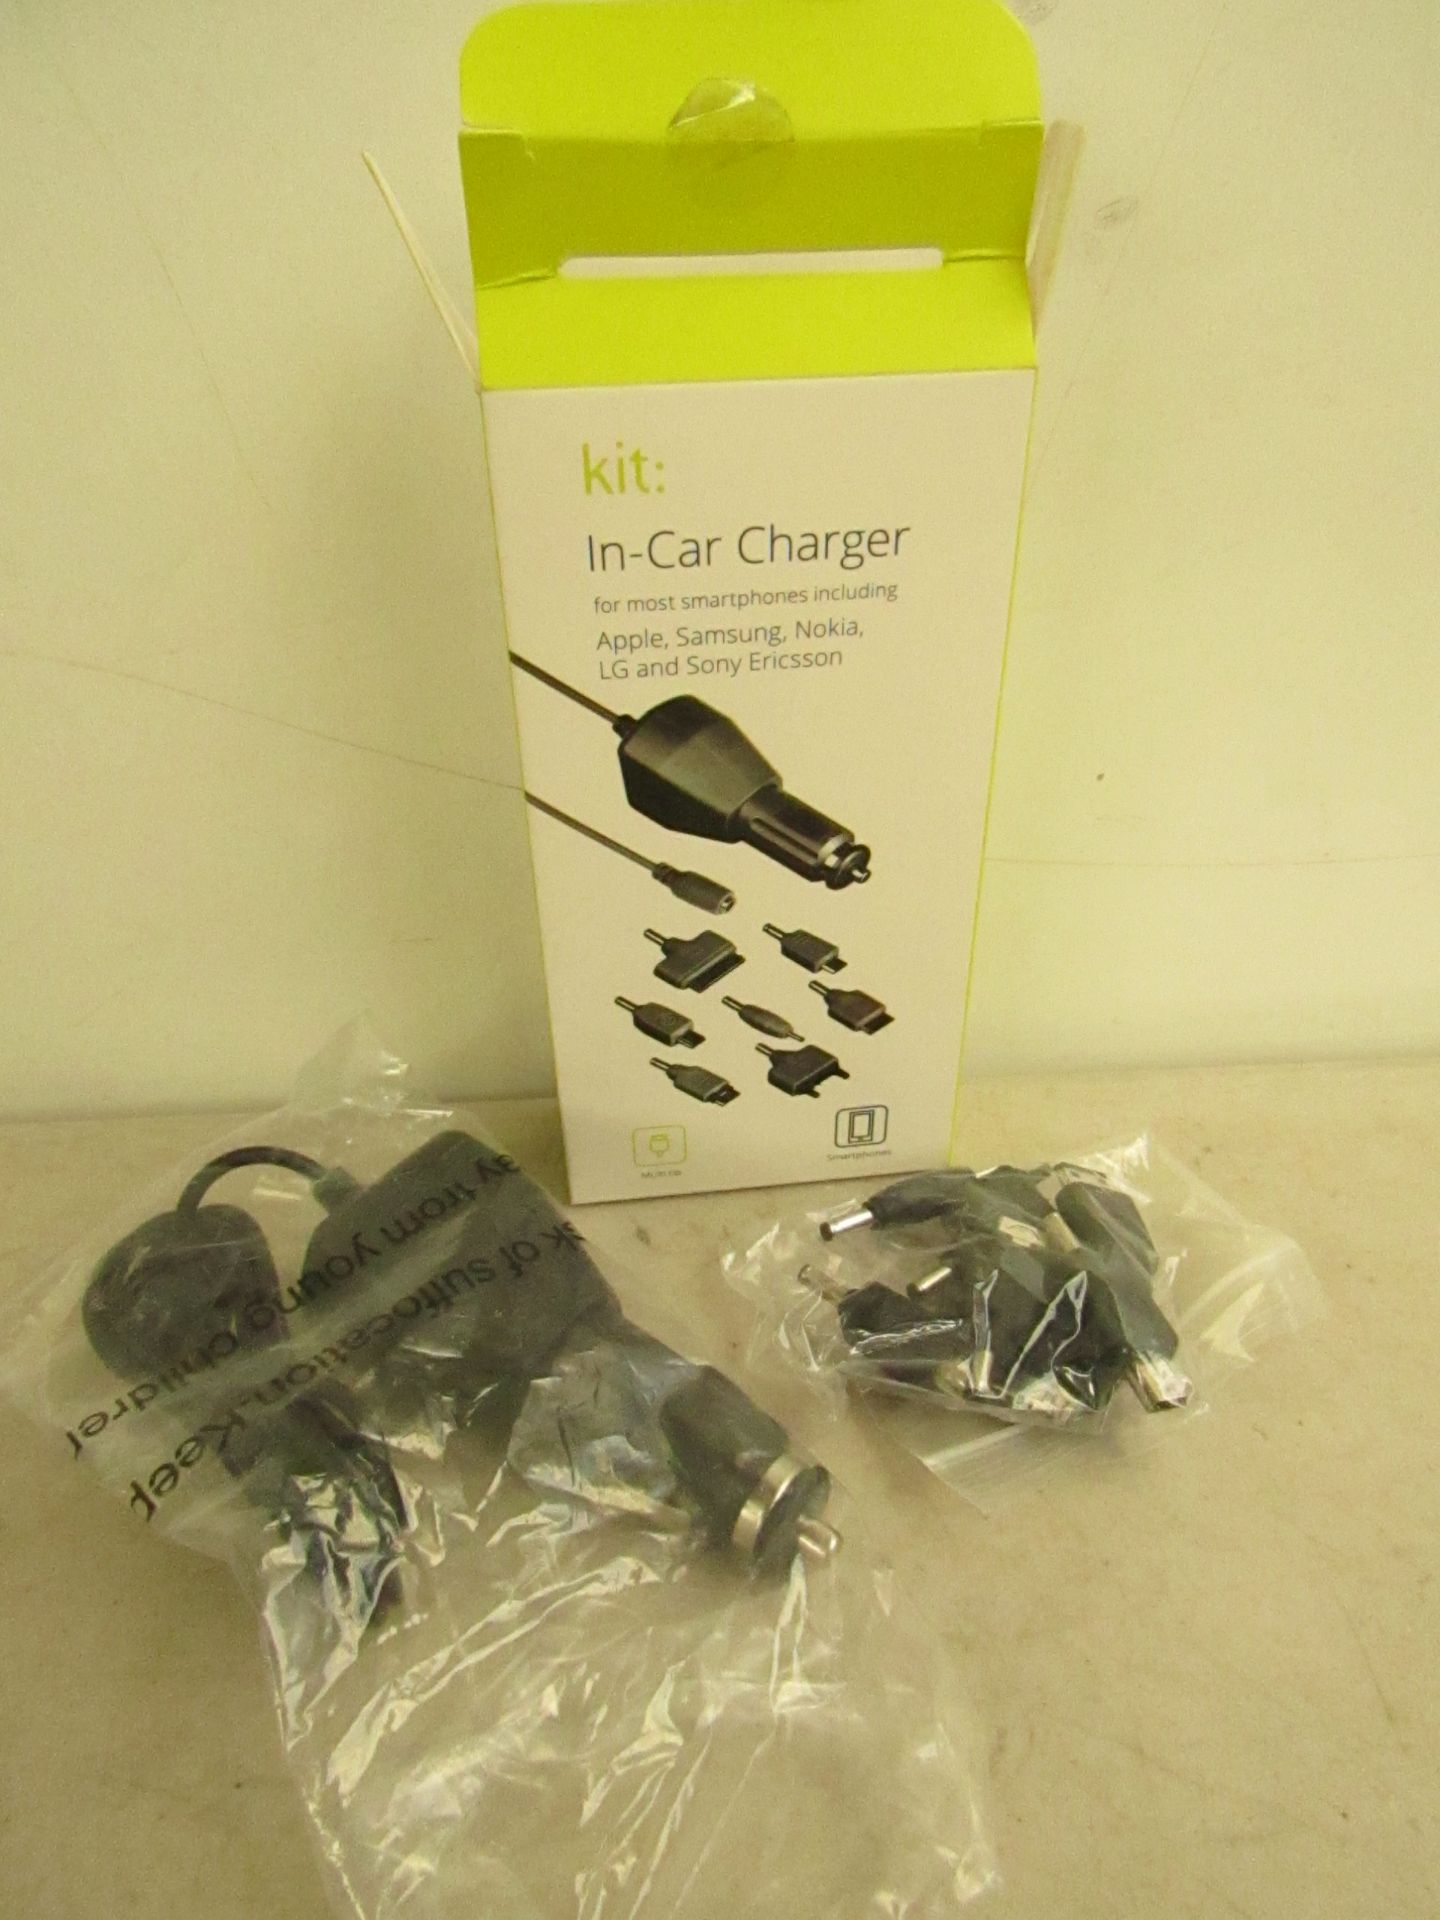 100x Kit in-car chargers, (universal) new and boxed.